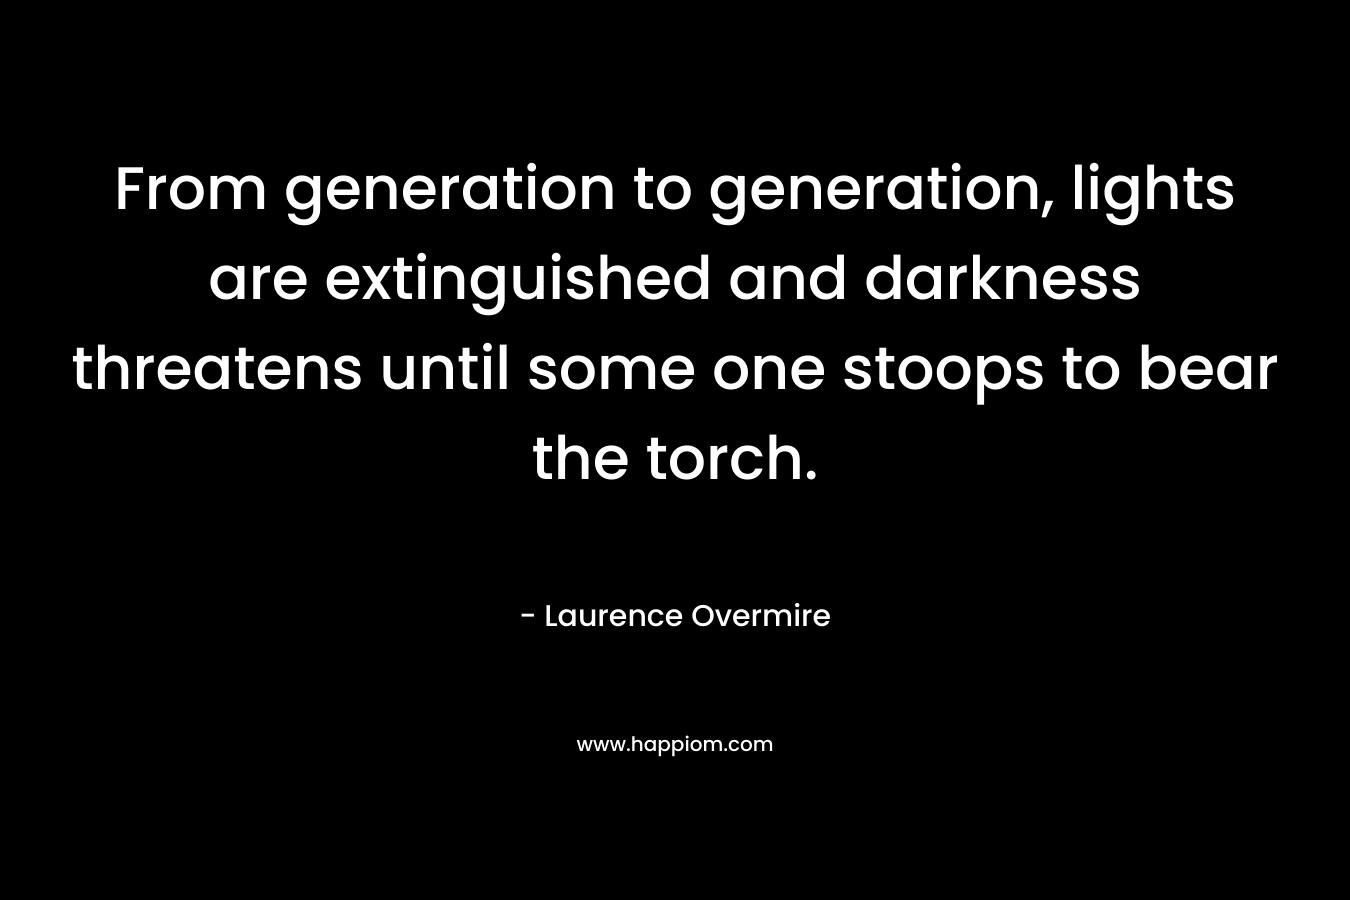 From generation to generation, lights are extinguished and darkness threatens until some one stoops to bear the torch. – Laurence Overmire